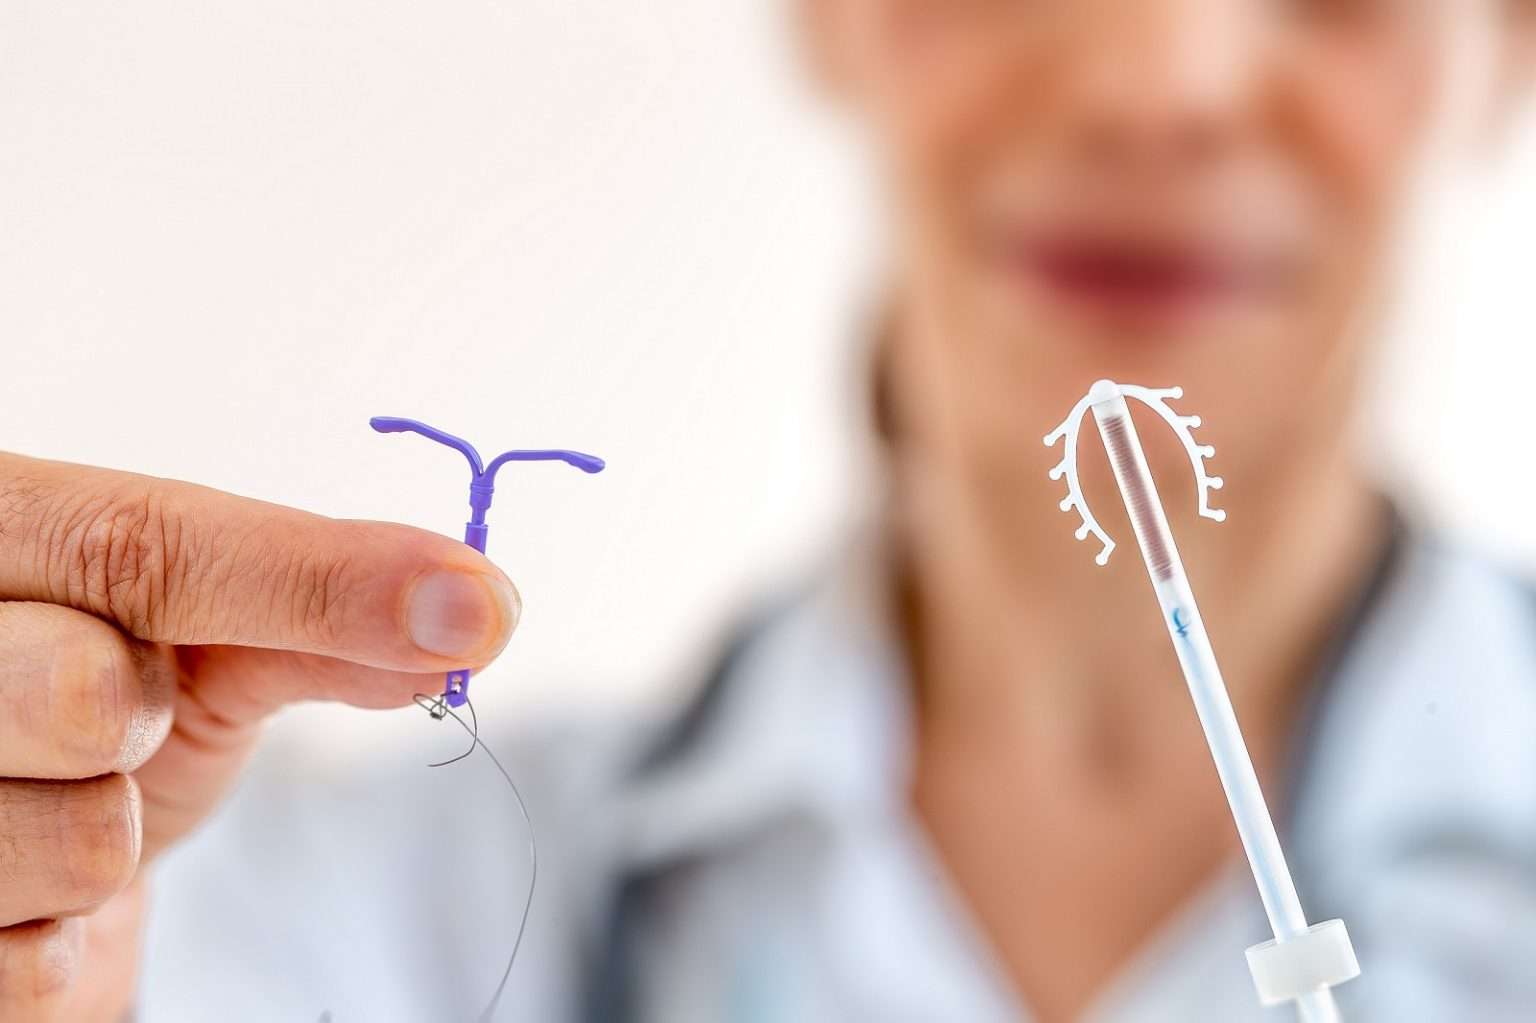 IUDs and Fibroids: Best Contraceptive?